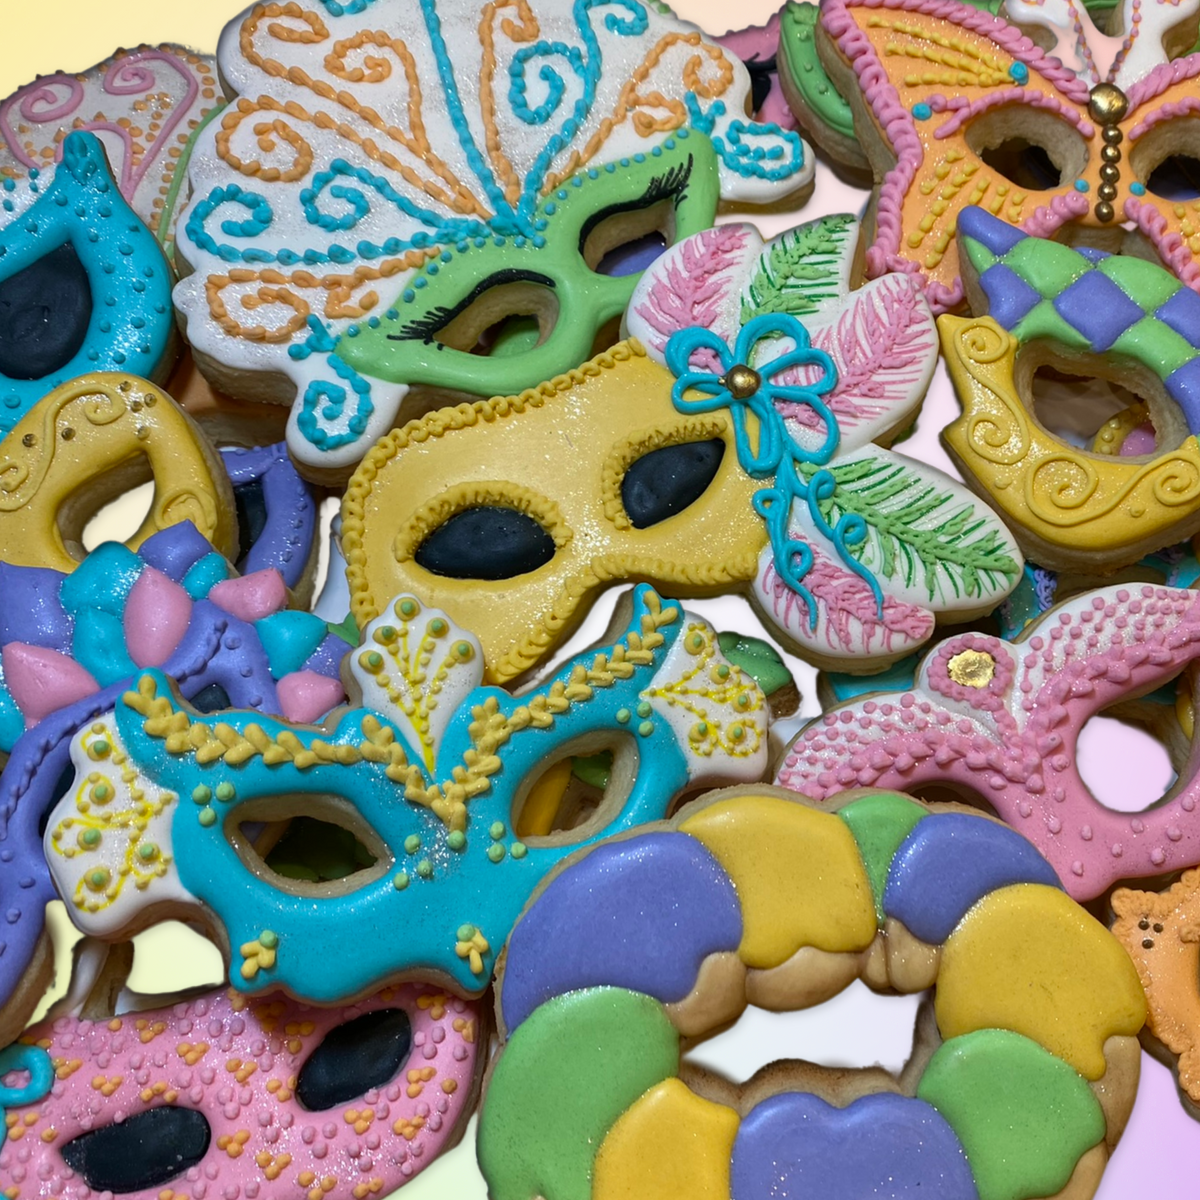 Mardi Gras Mask 7 Cookie Cutter & New Year's Mask 7 Cookie Cutter Designed  by Ali Bee's Bake Shop guideline Sketch to Print Below 